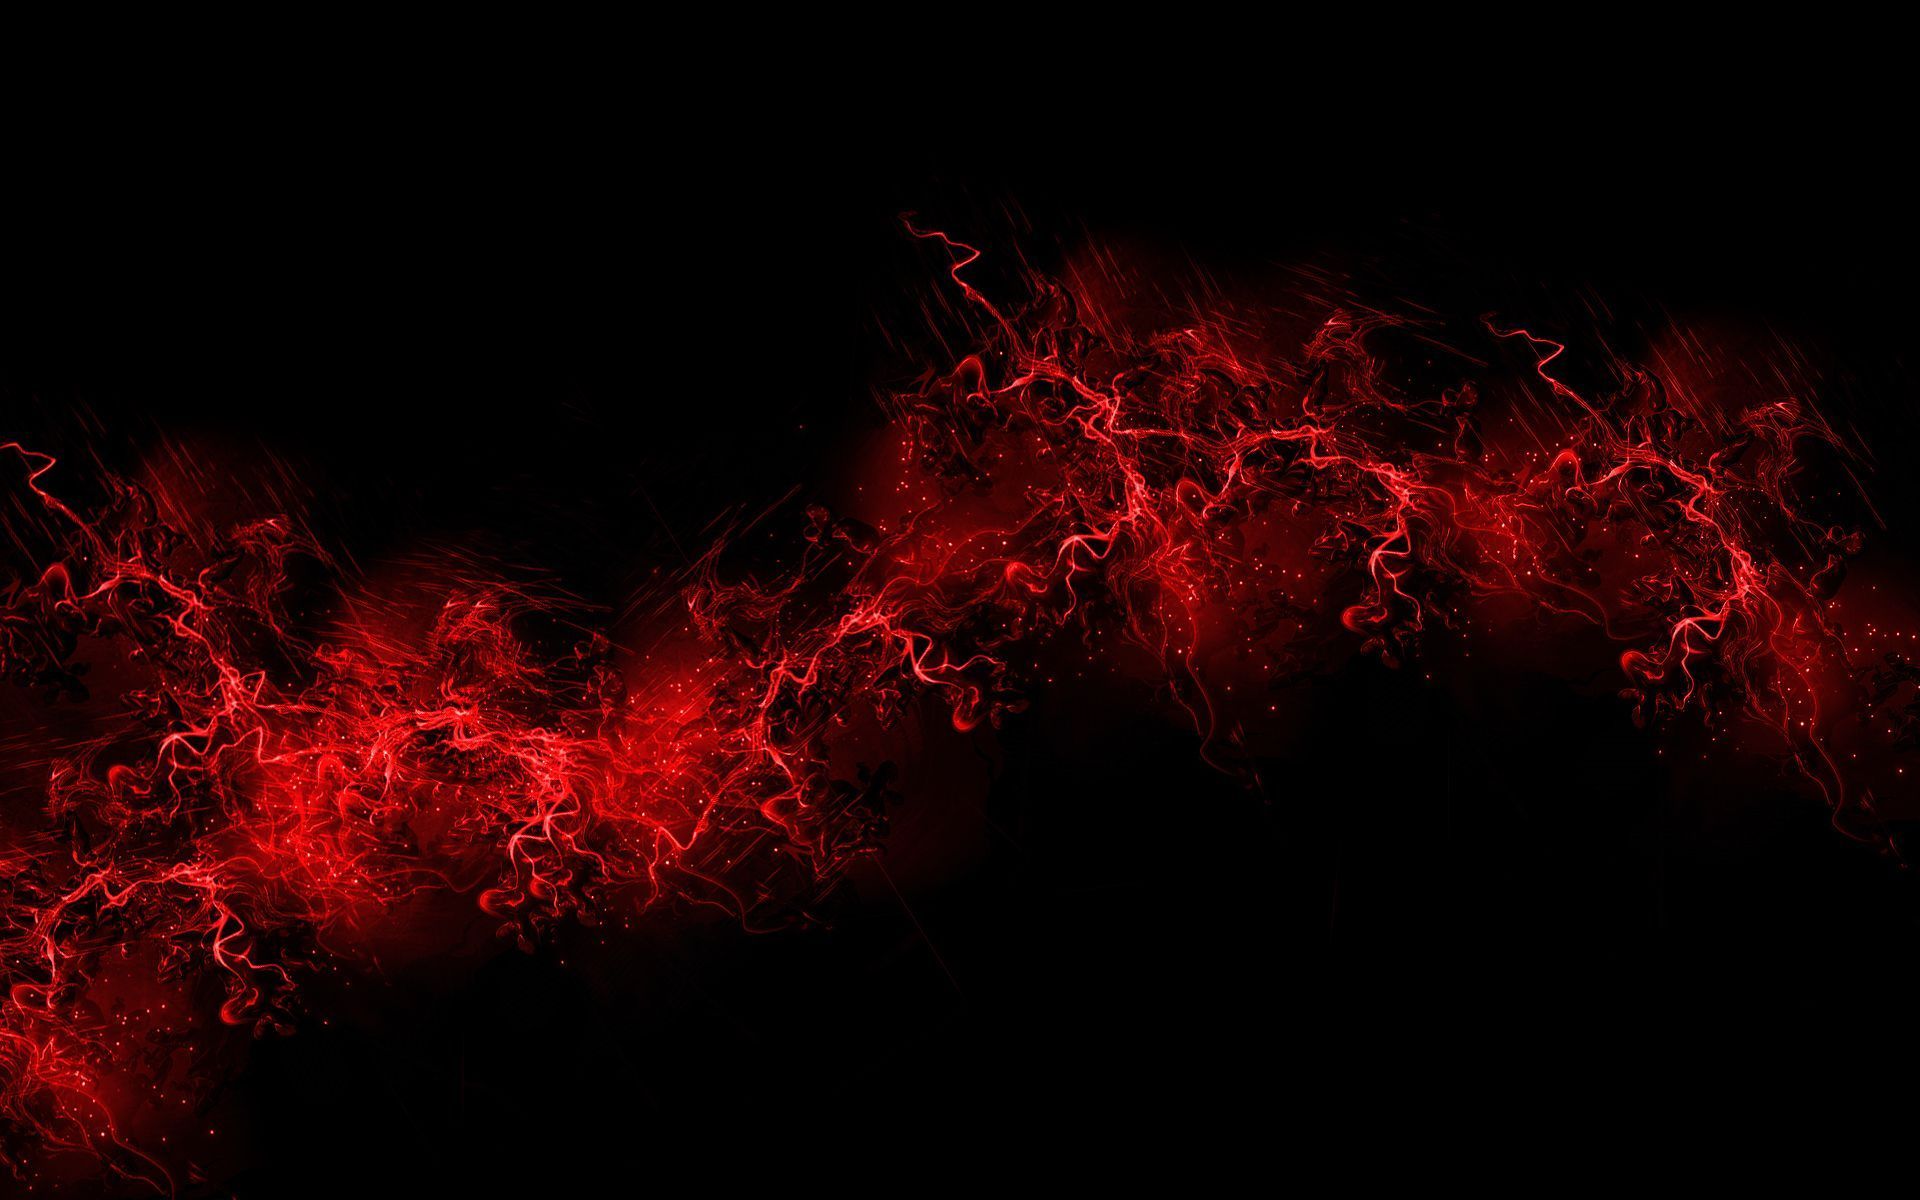 black background free hd download : Cool Red And Black Backgrounds ...